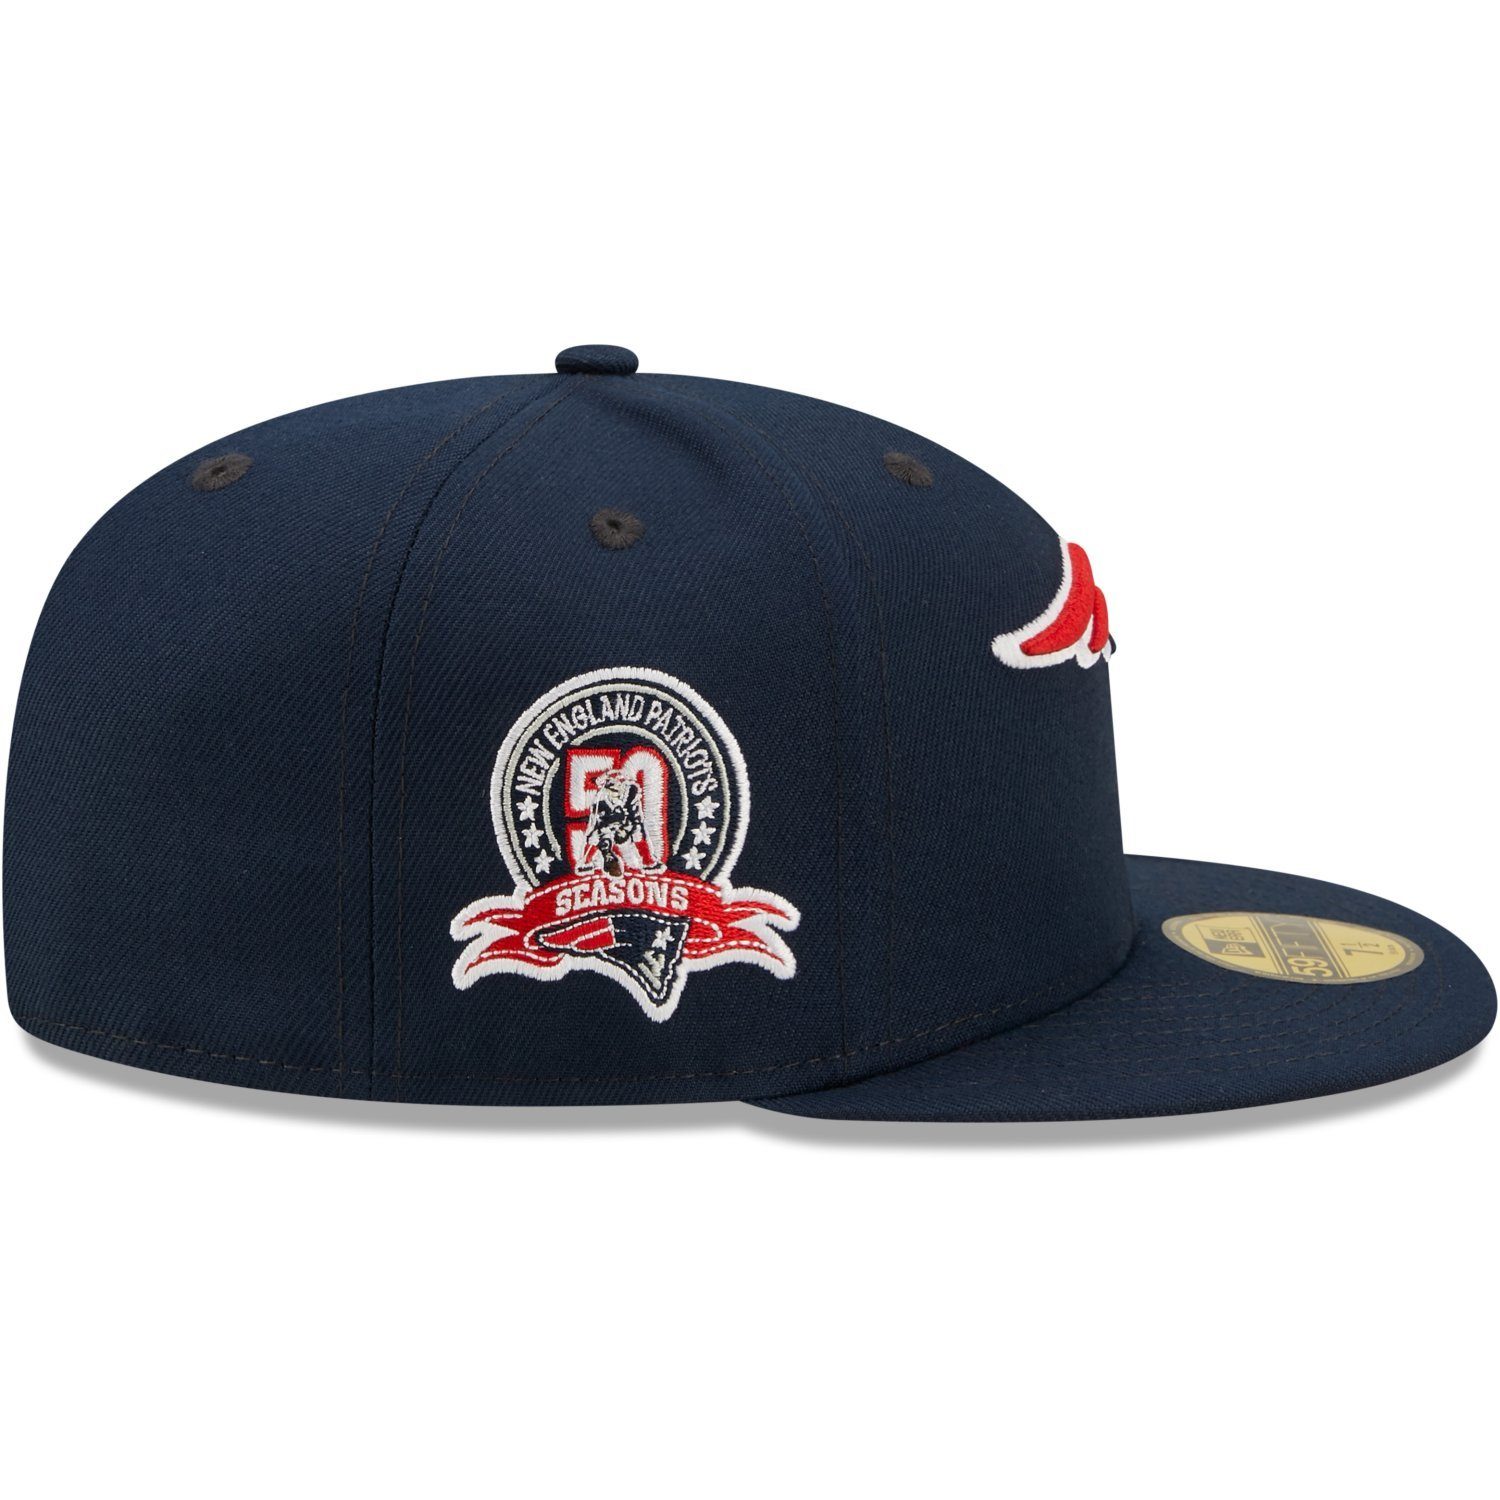 New Era Fitted Cap 59Fifty Patriots New 50 Years England